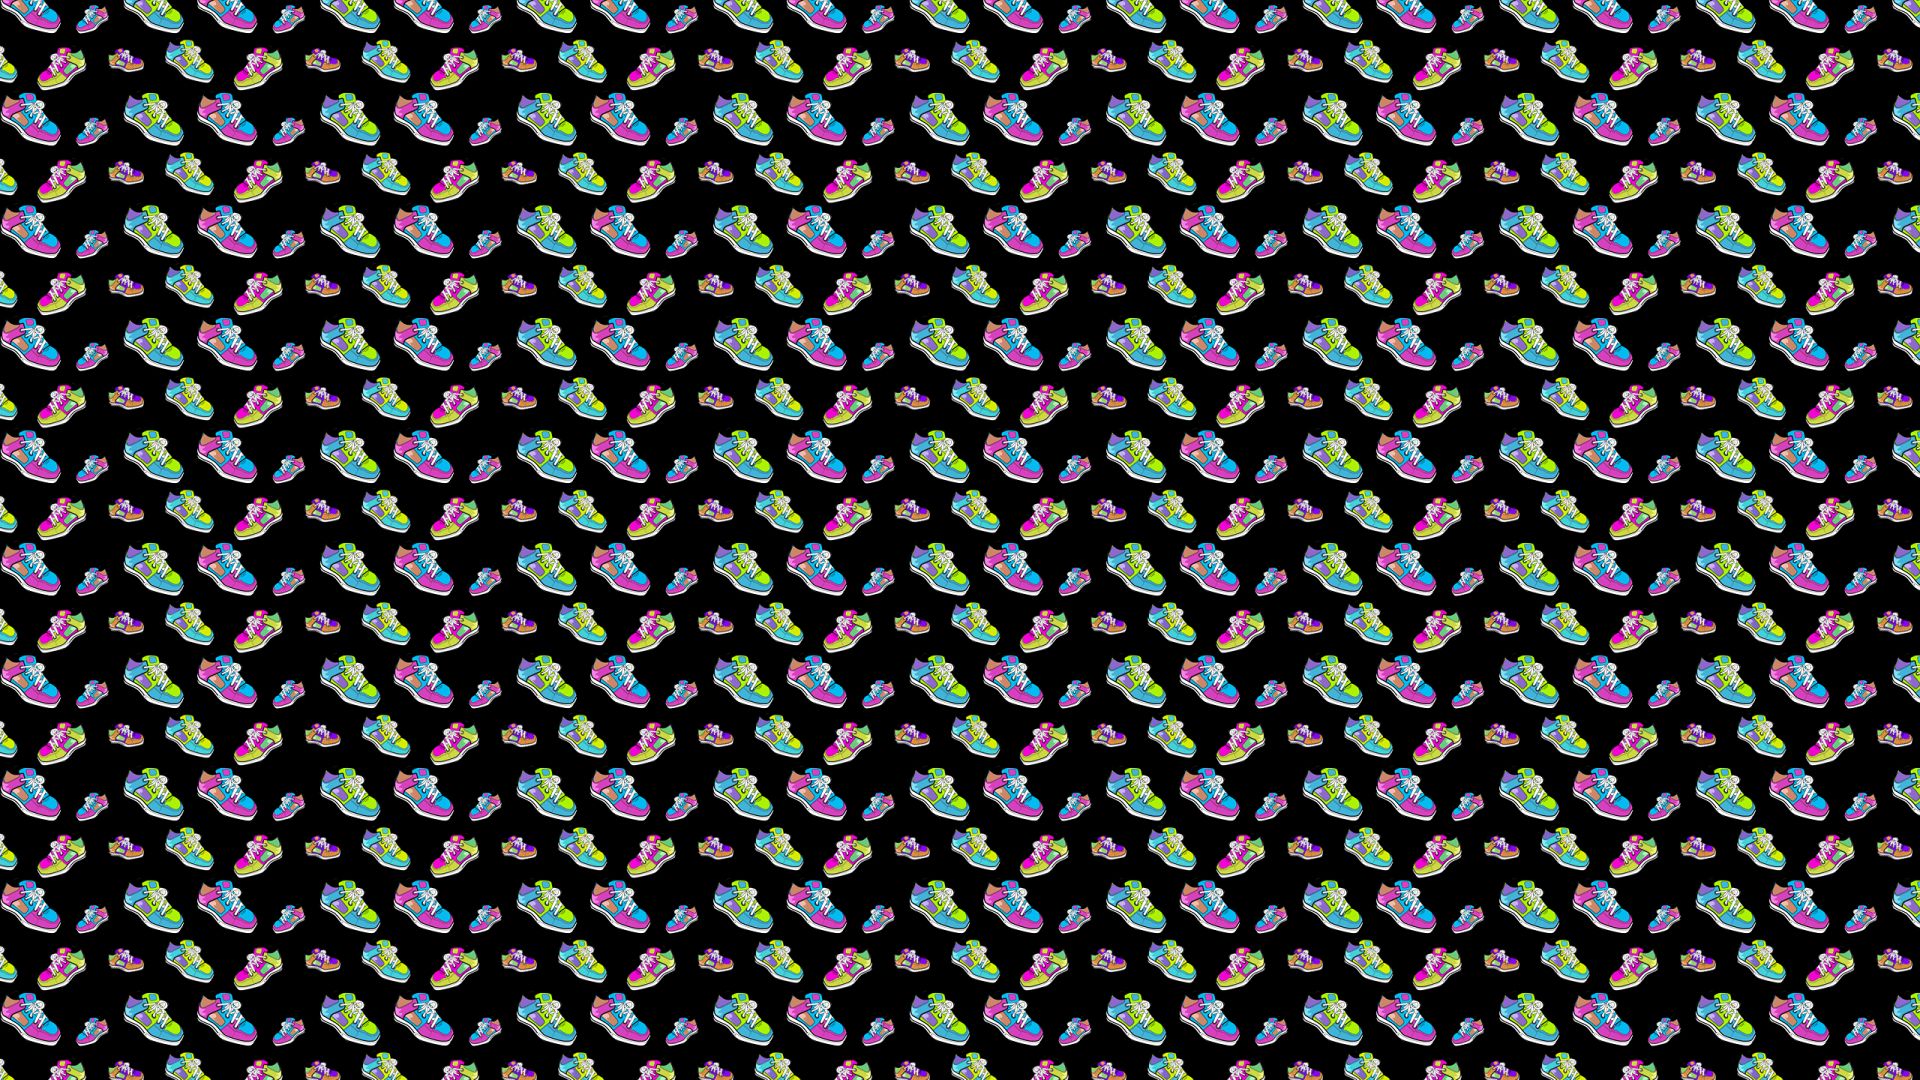 Holographic full hd wallpaper for laptop